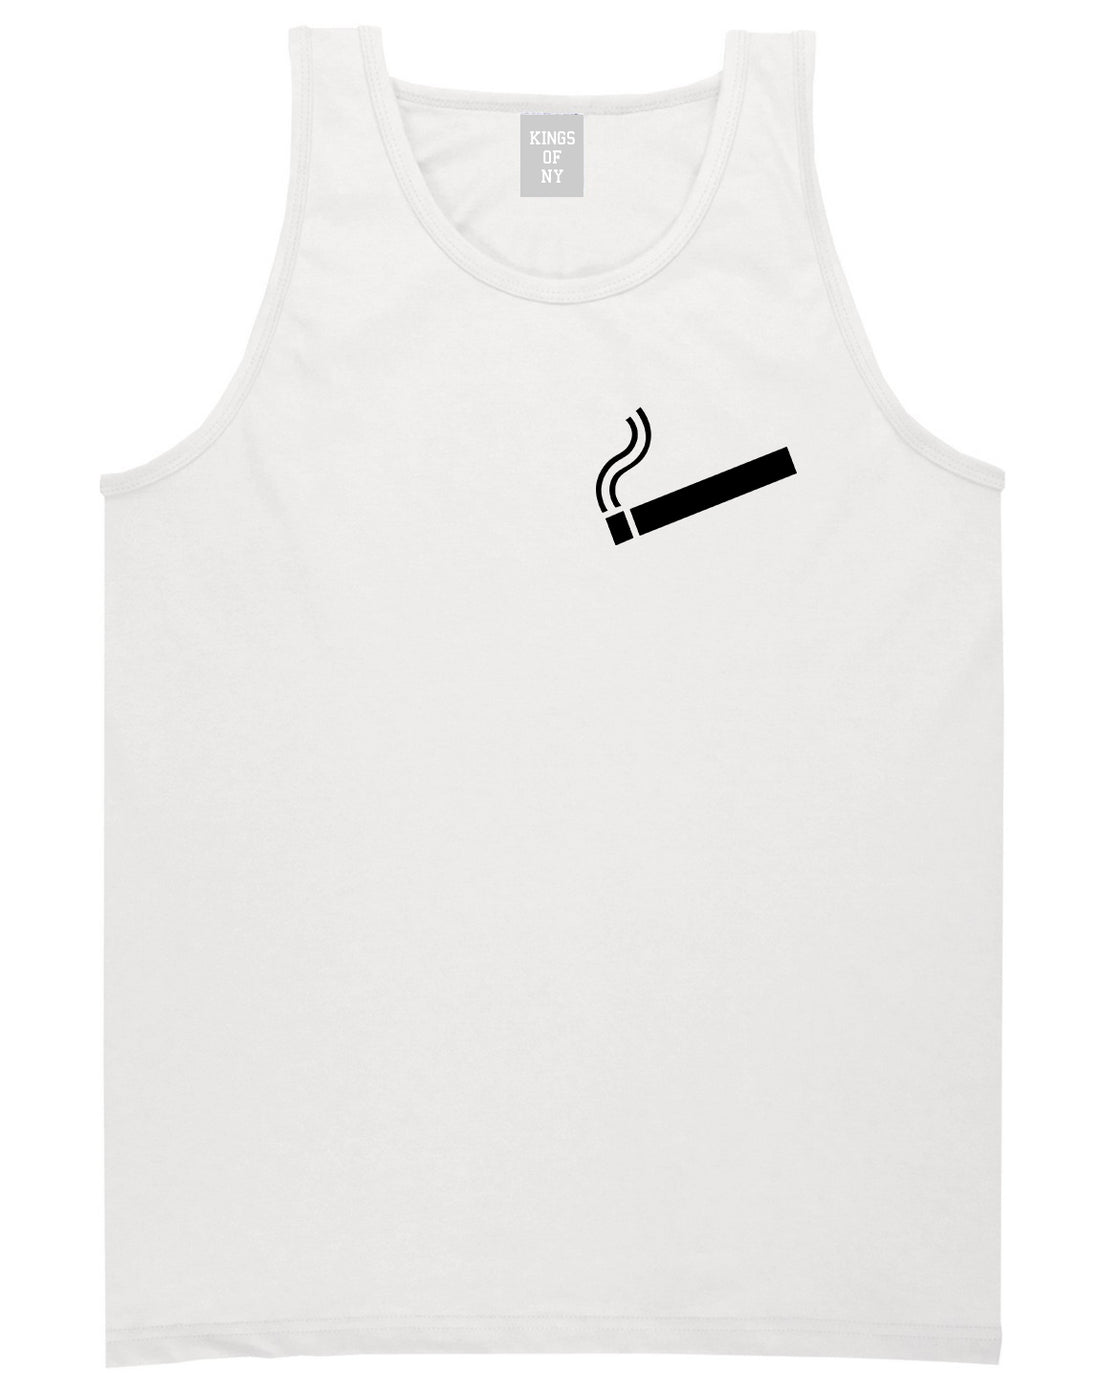 Cigarette Chest White Tank Top Shirt by Kings Of NY